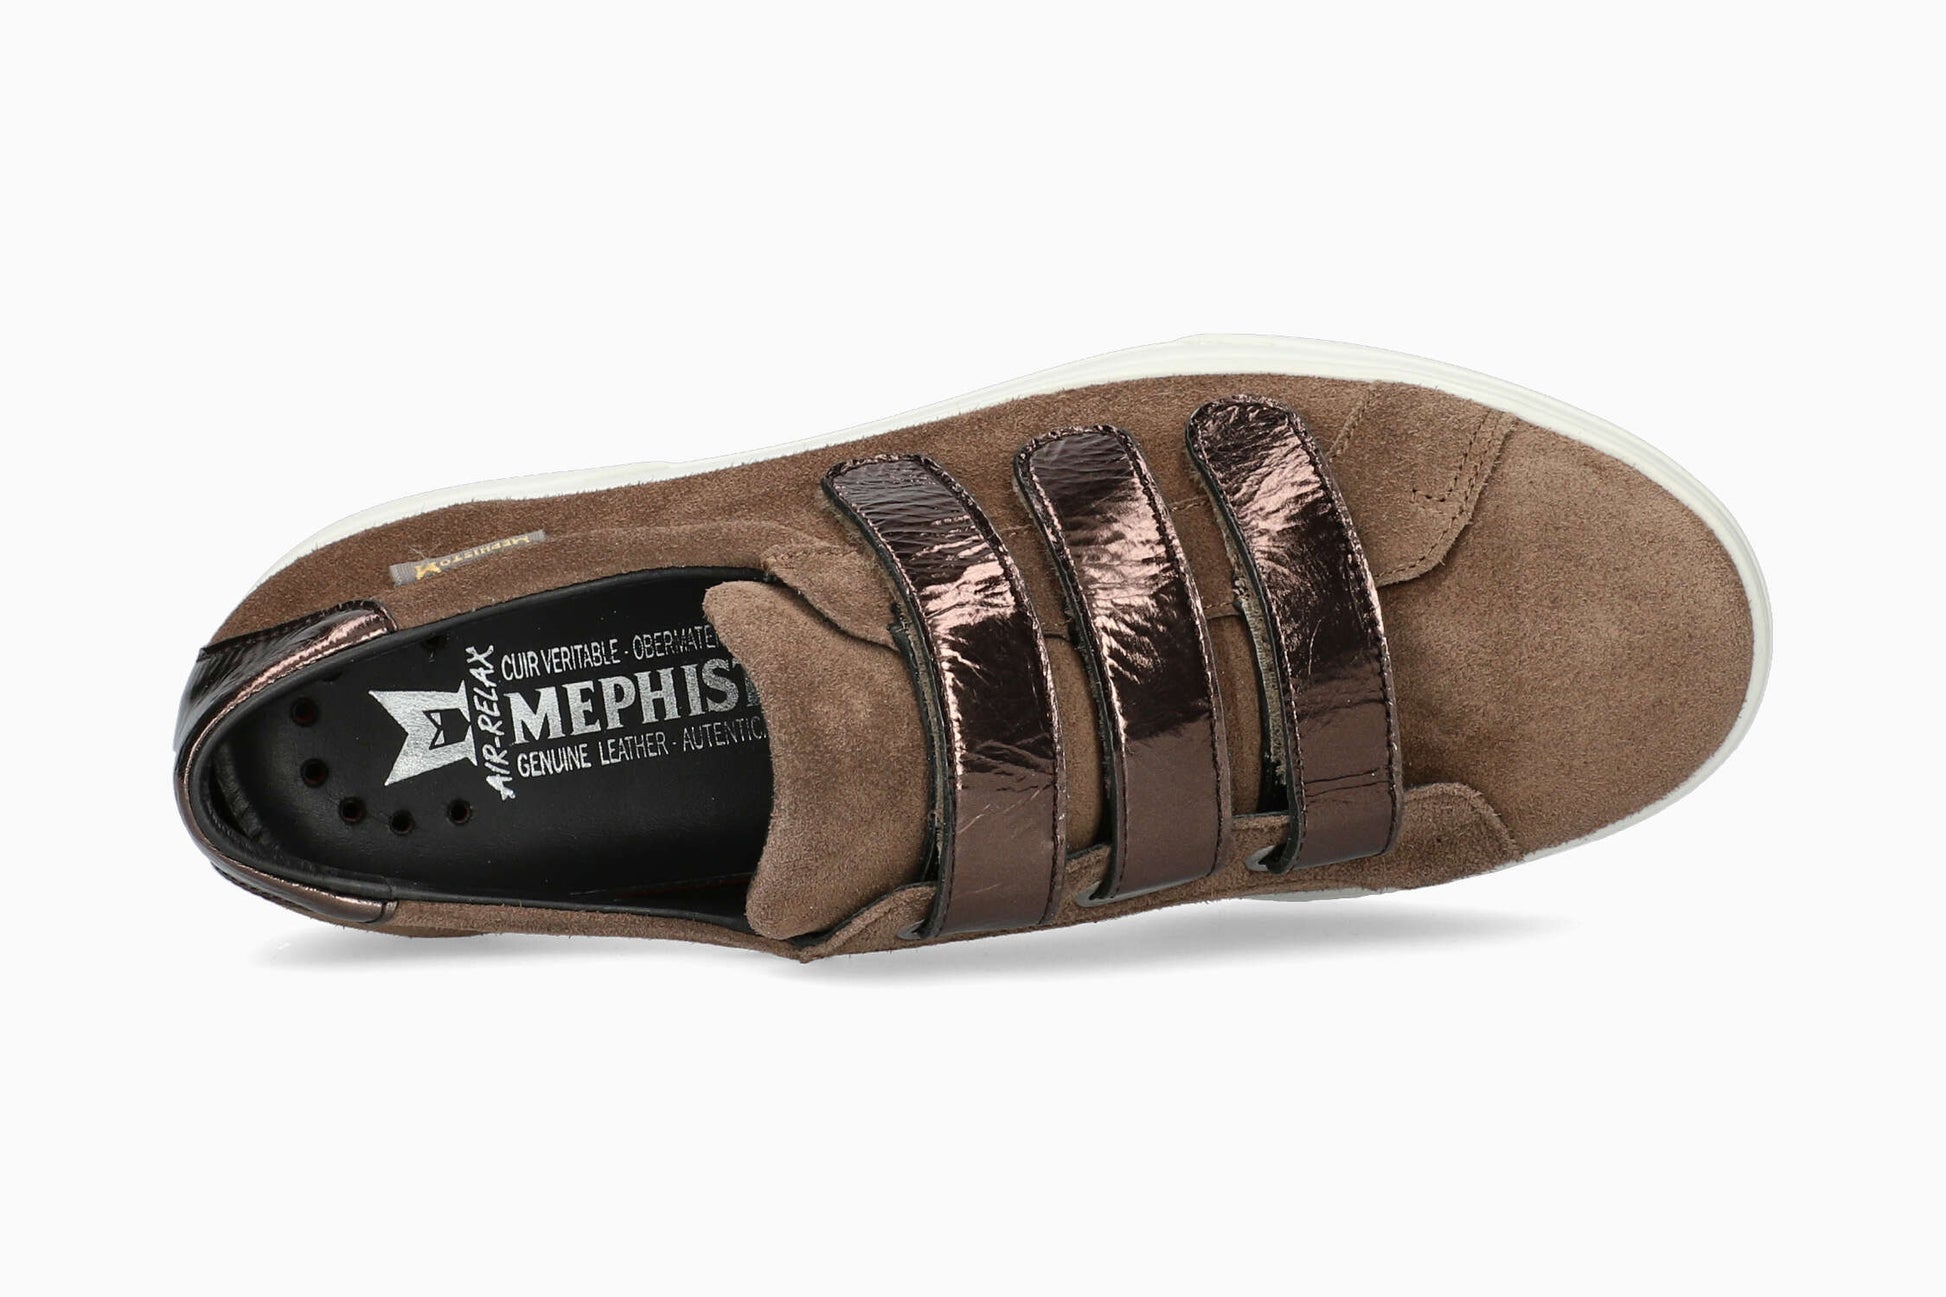 Mephisto Frederica Women's Sneaker Taupe Top